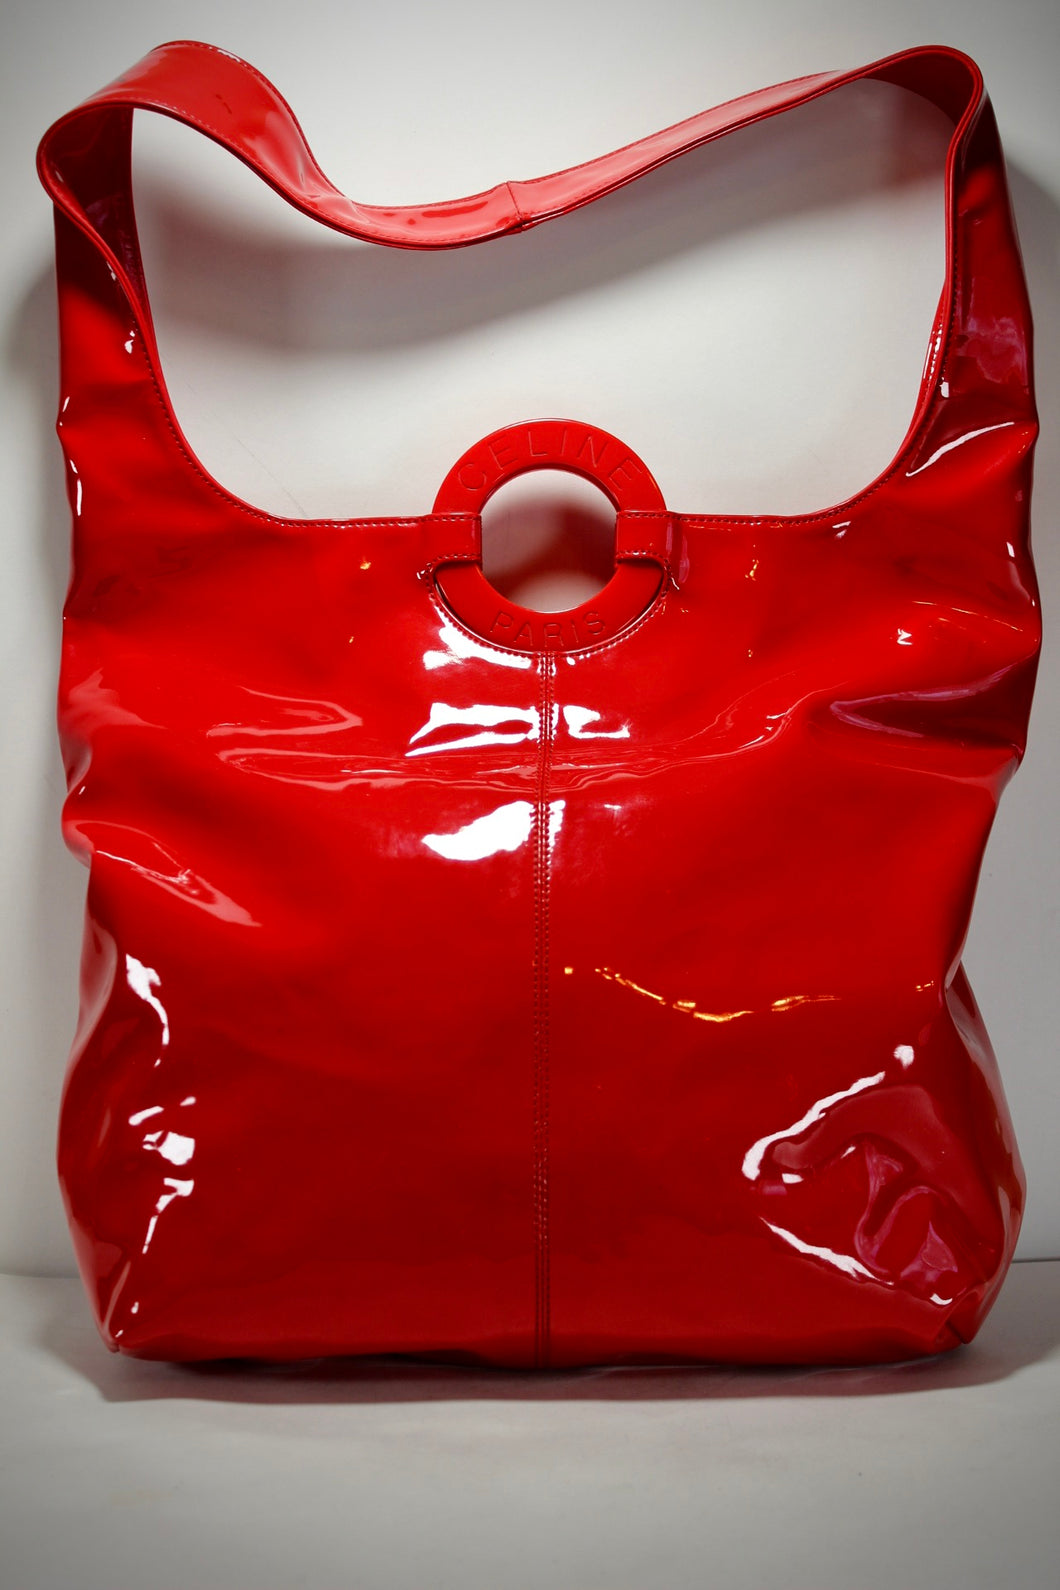 CELINE Red PVC Shiny Large Tote Bag Italy